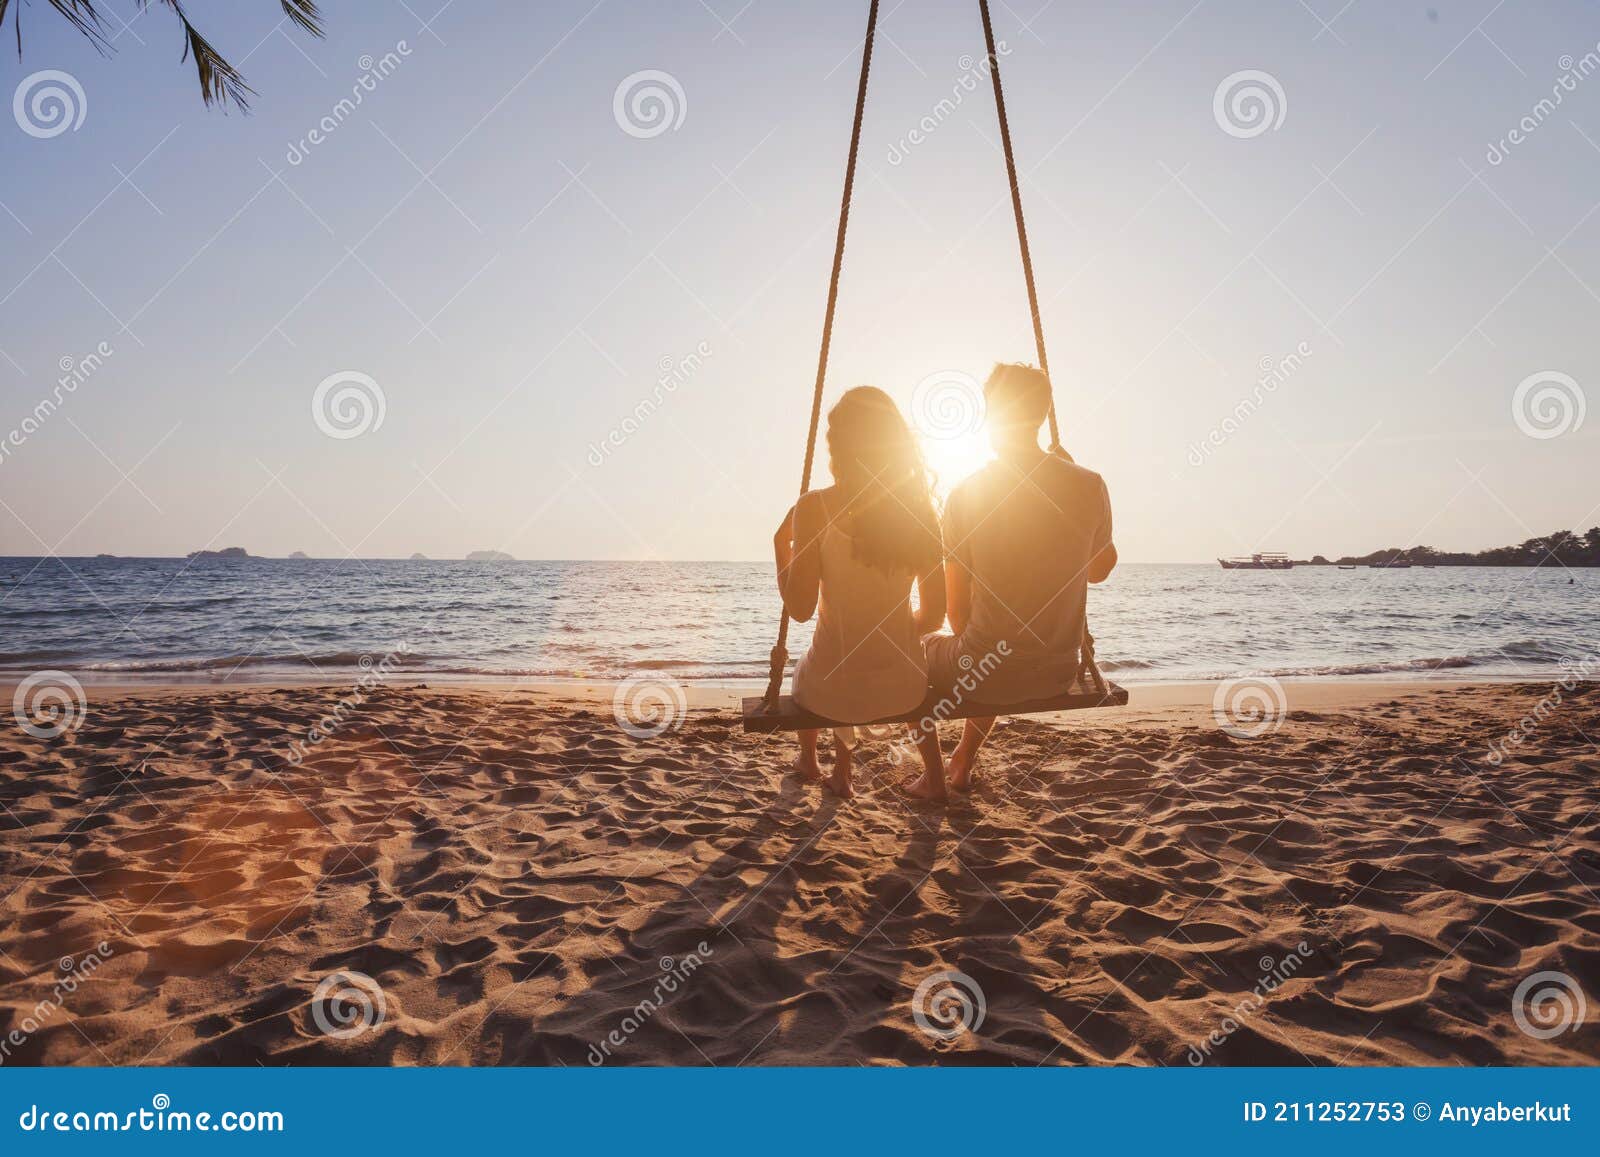 beach holidays for romantic young couple, honeymoon vacations, silhouettes of man and woman